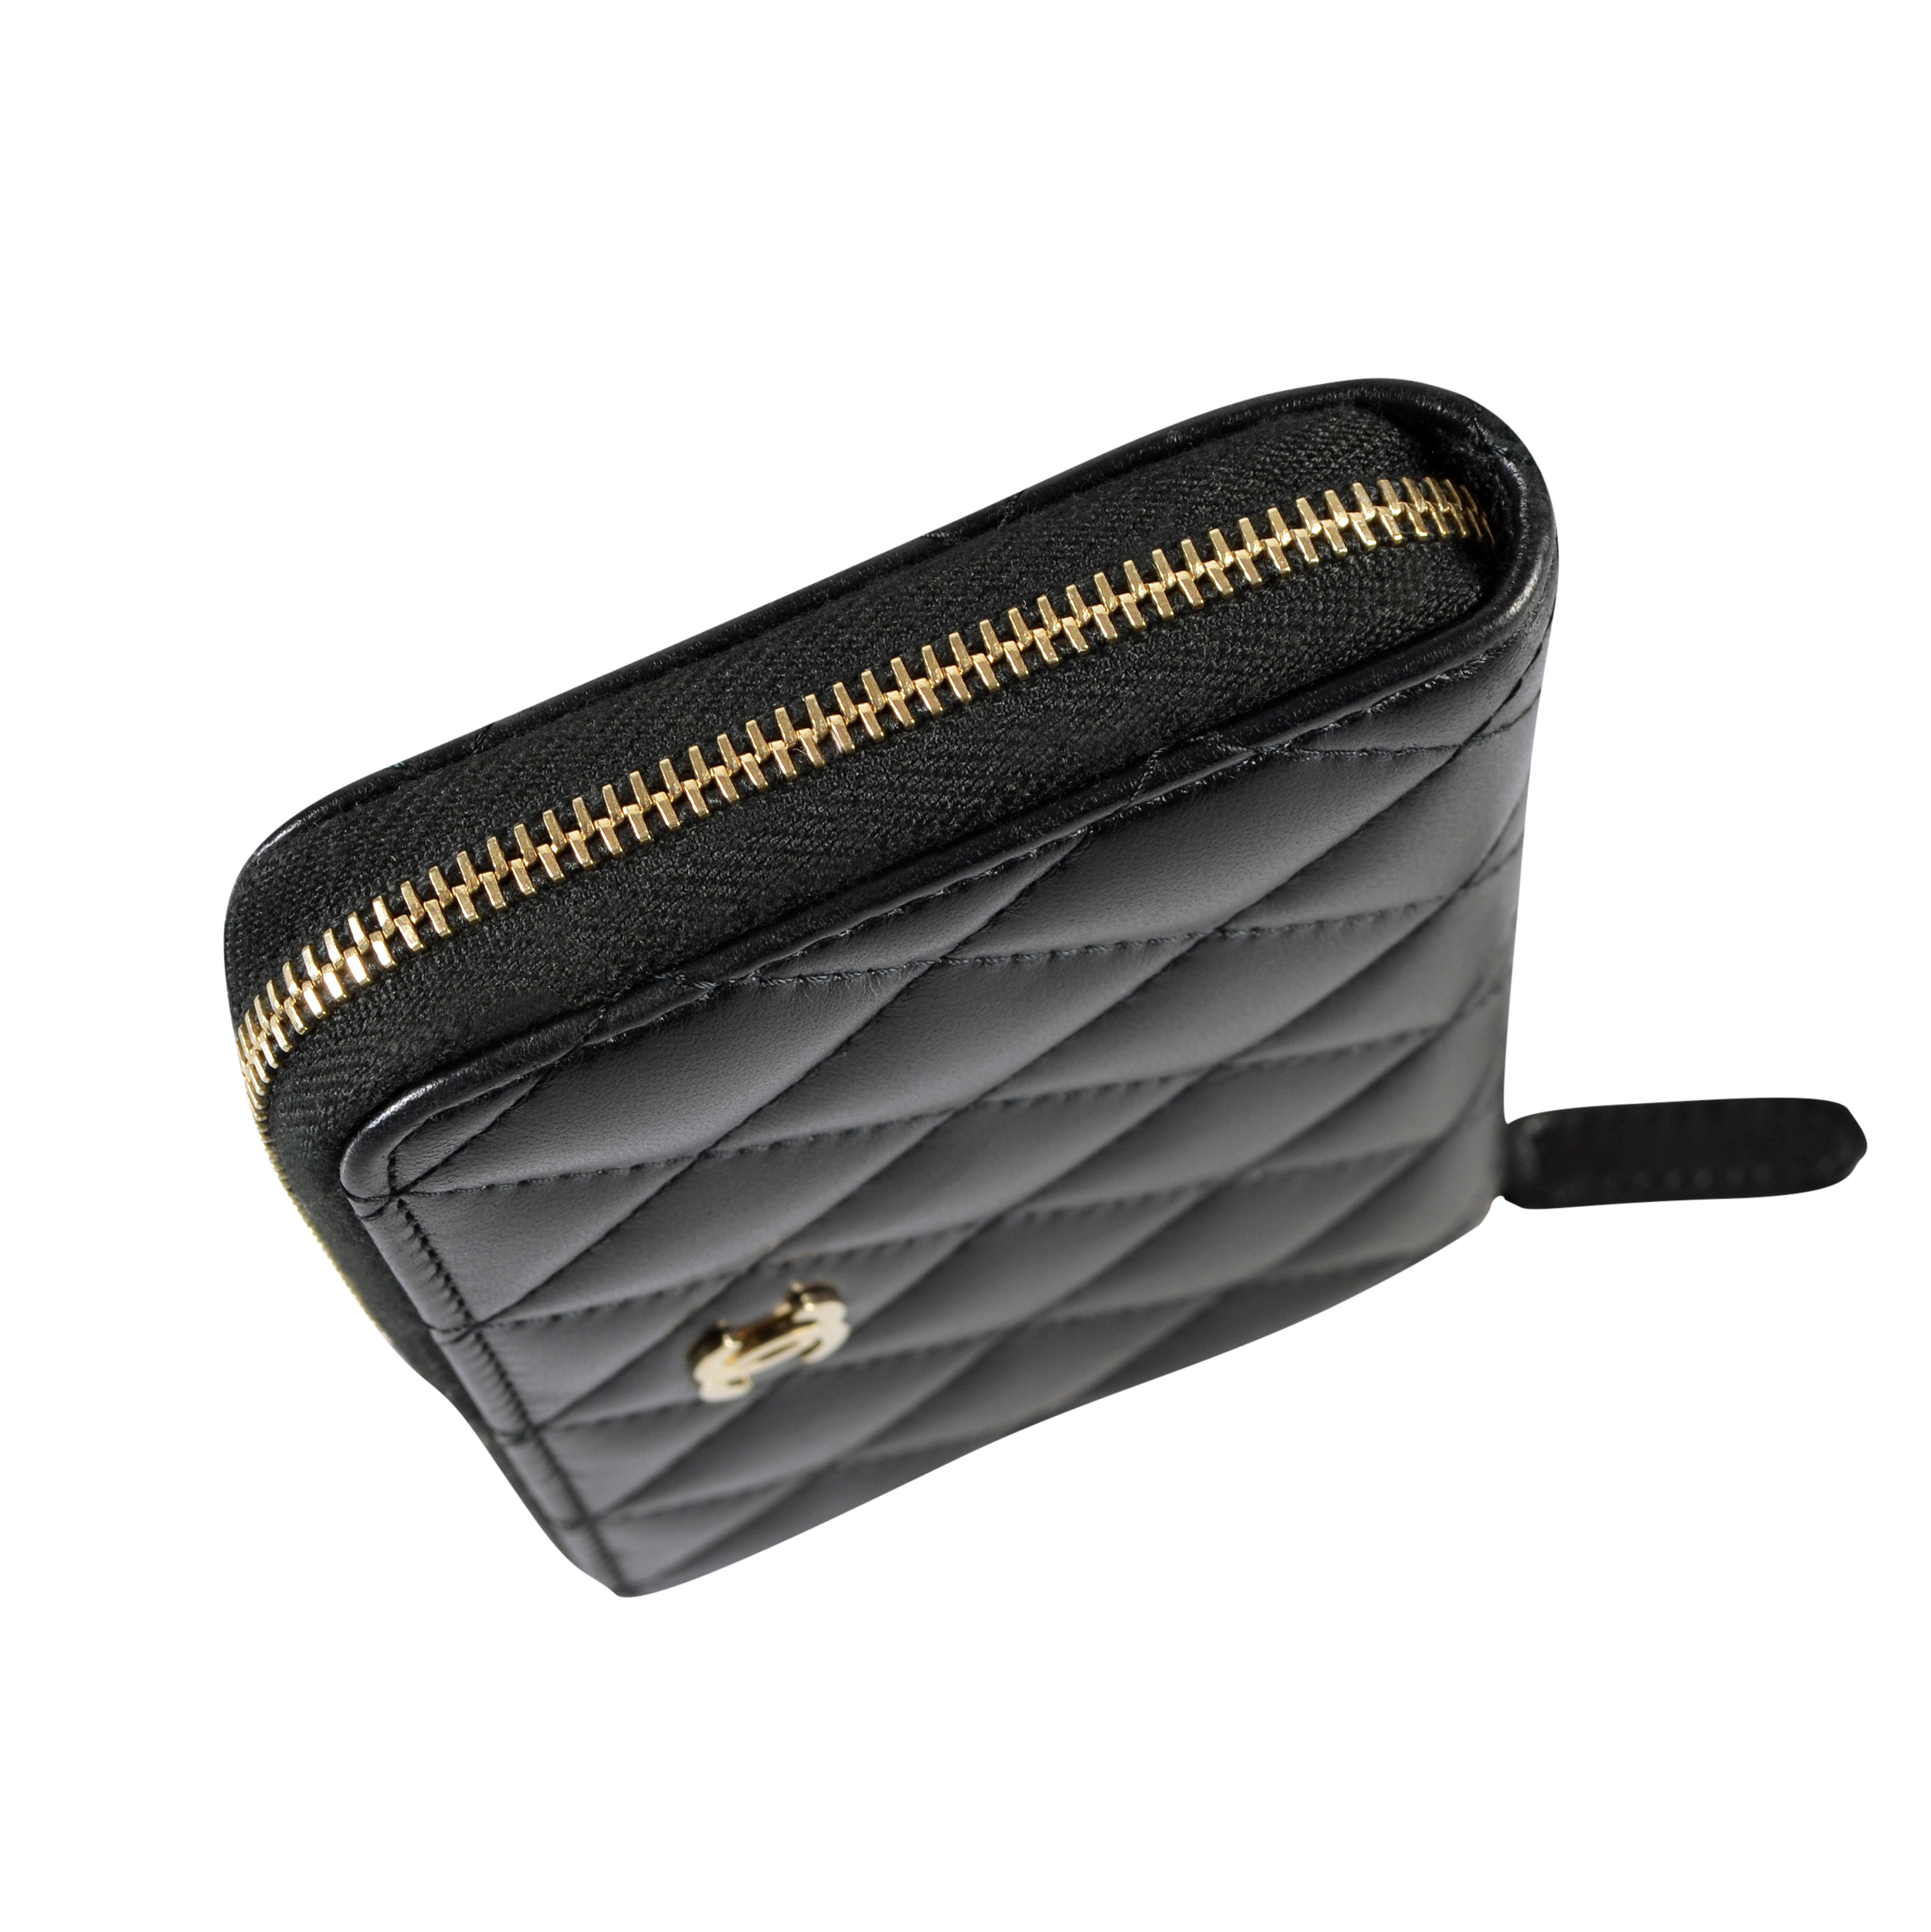 Chanel Boy Wallet on Chain WOC Black Lambskin Gold Hardware – Coco Approved  Studio